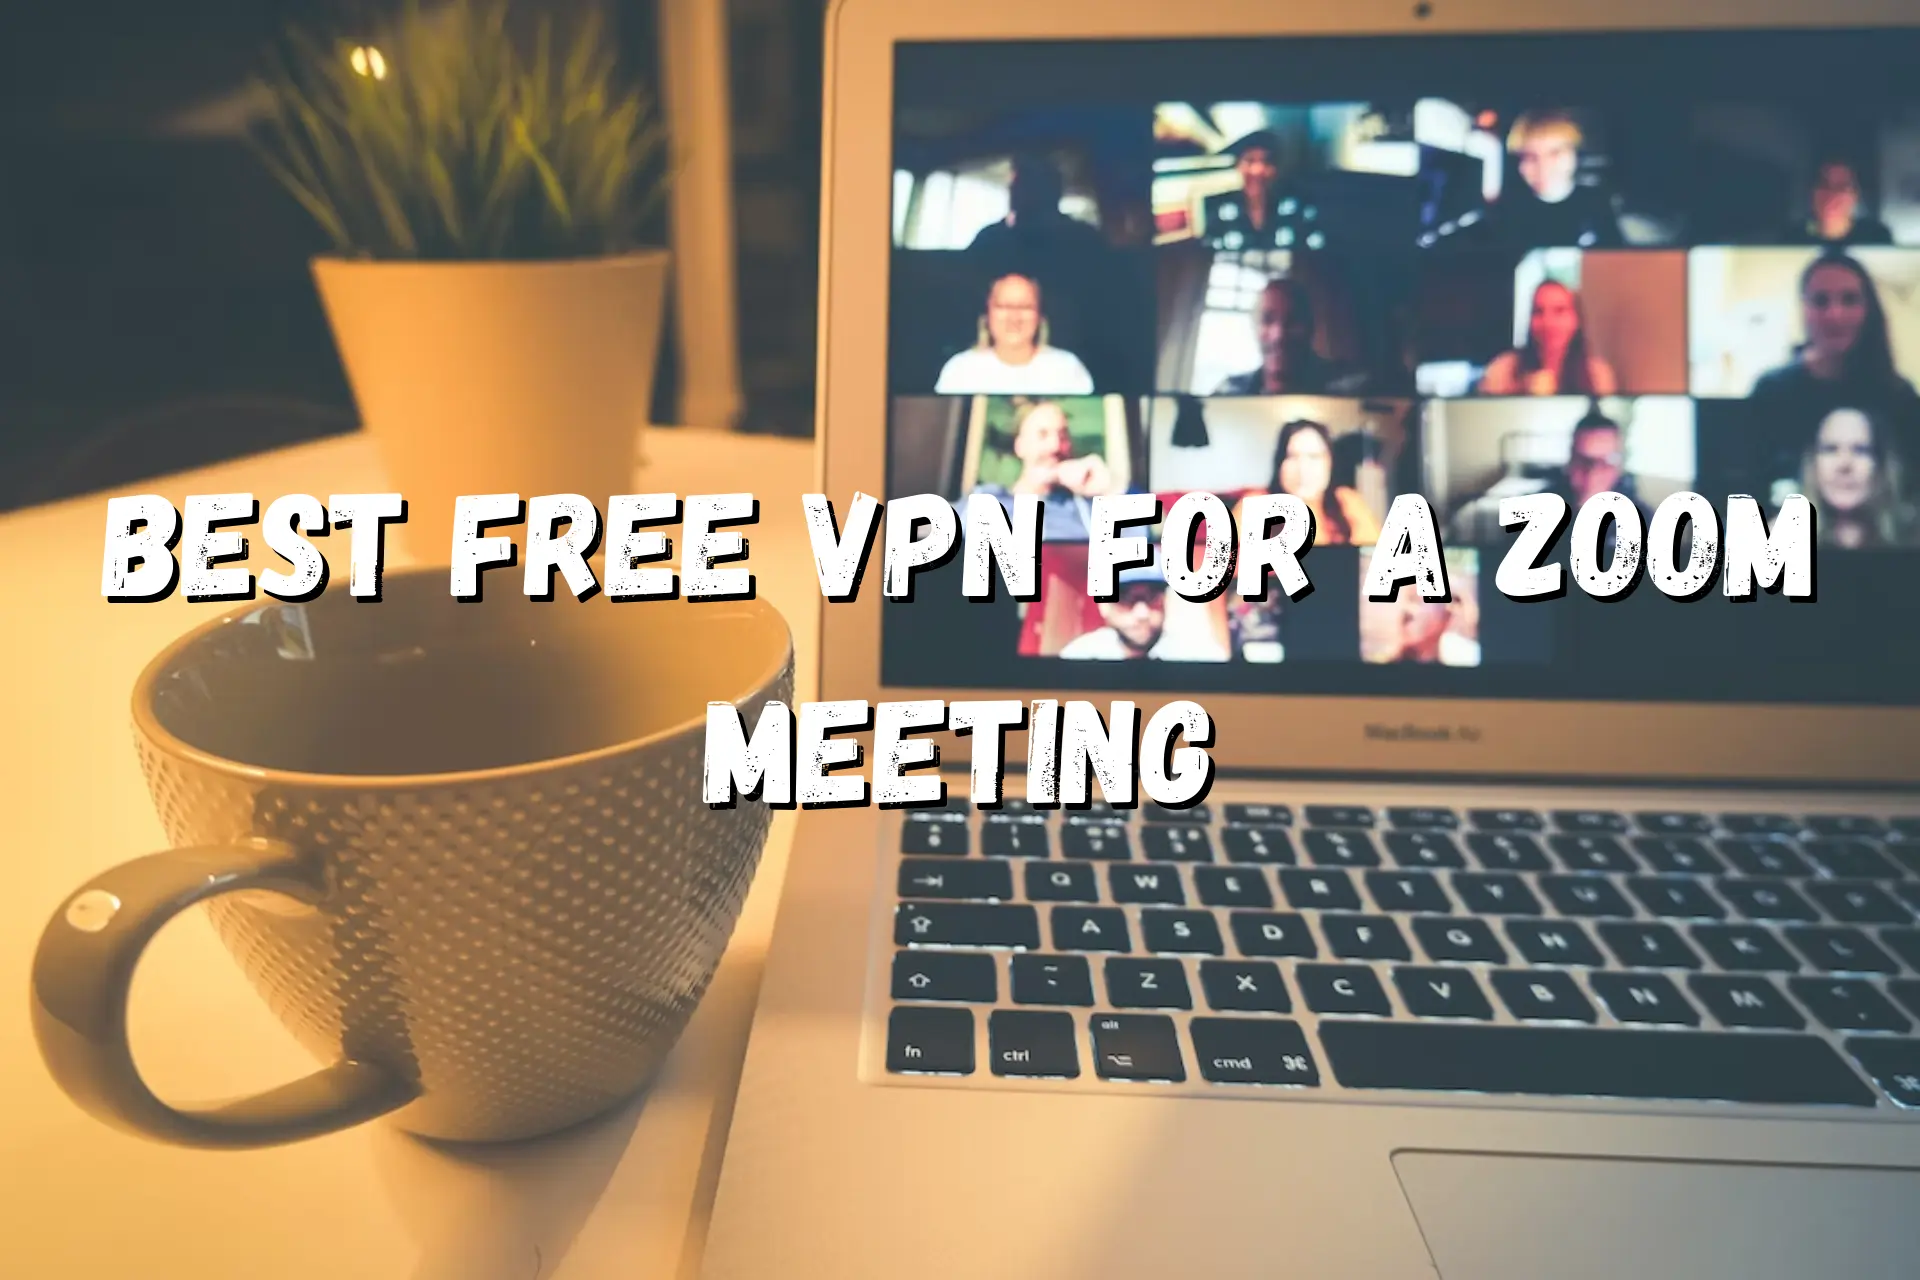 Best free vpn for a zoom meeting